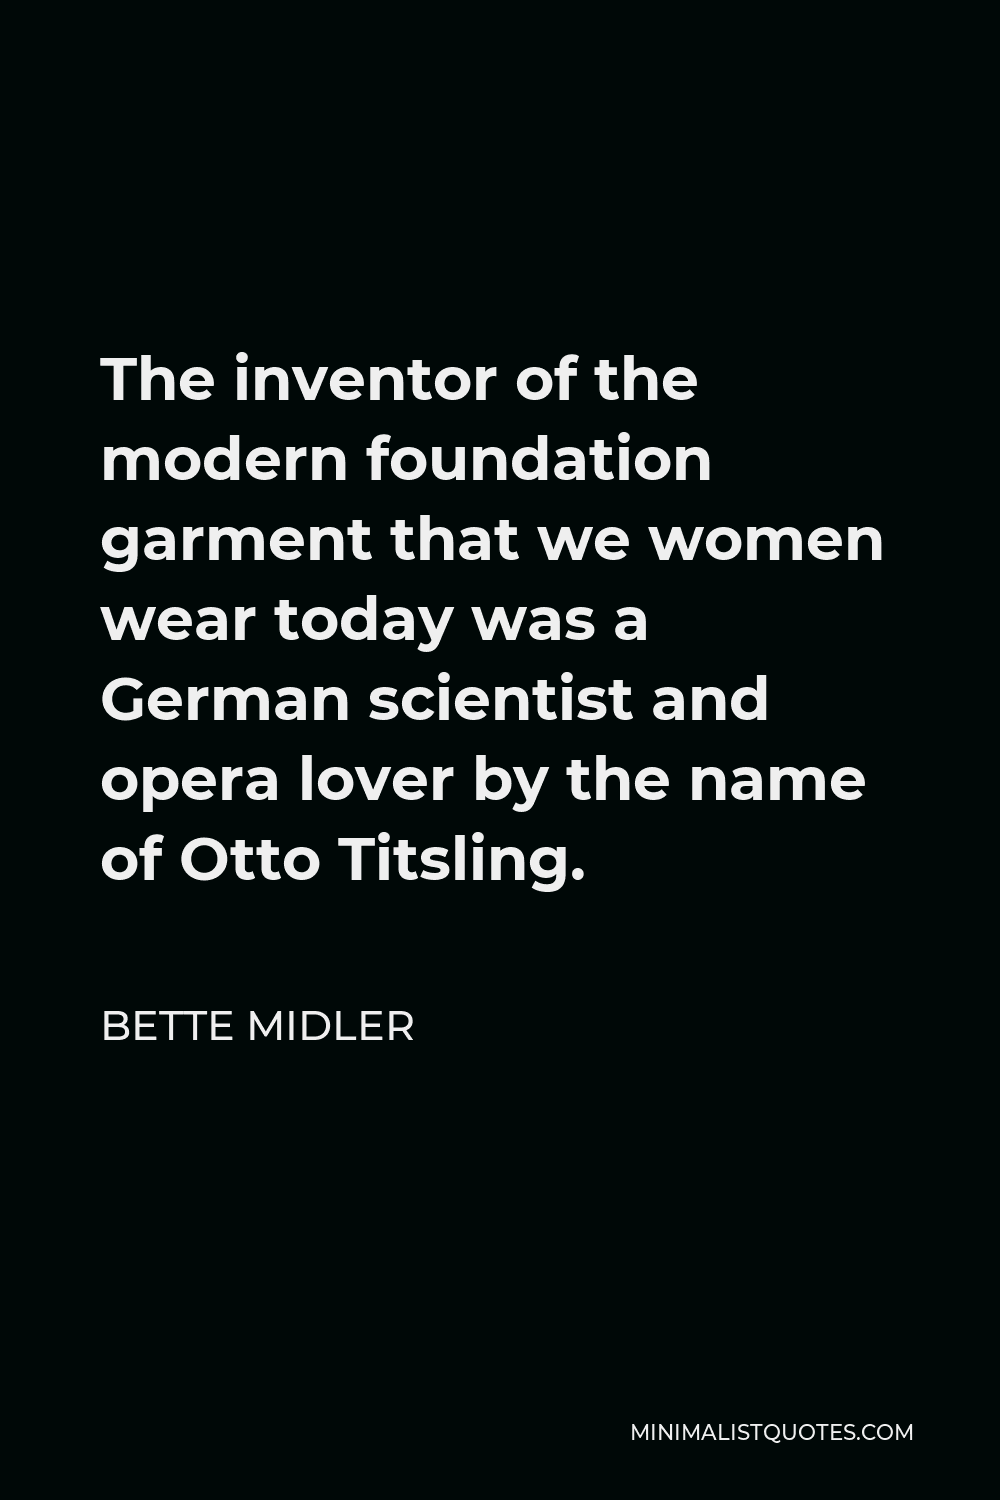 Bette Midler Quote - The inventor of the modern foundation garment that we women wear today was a German scientist and opera lover by the name of Otto Titsling.